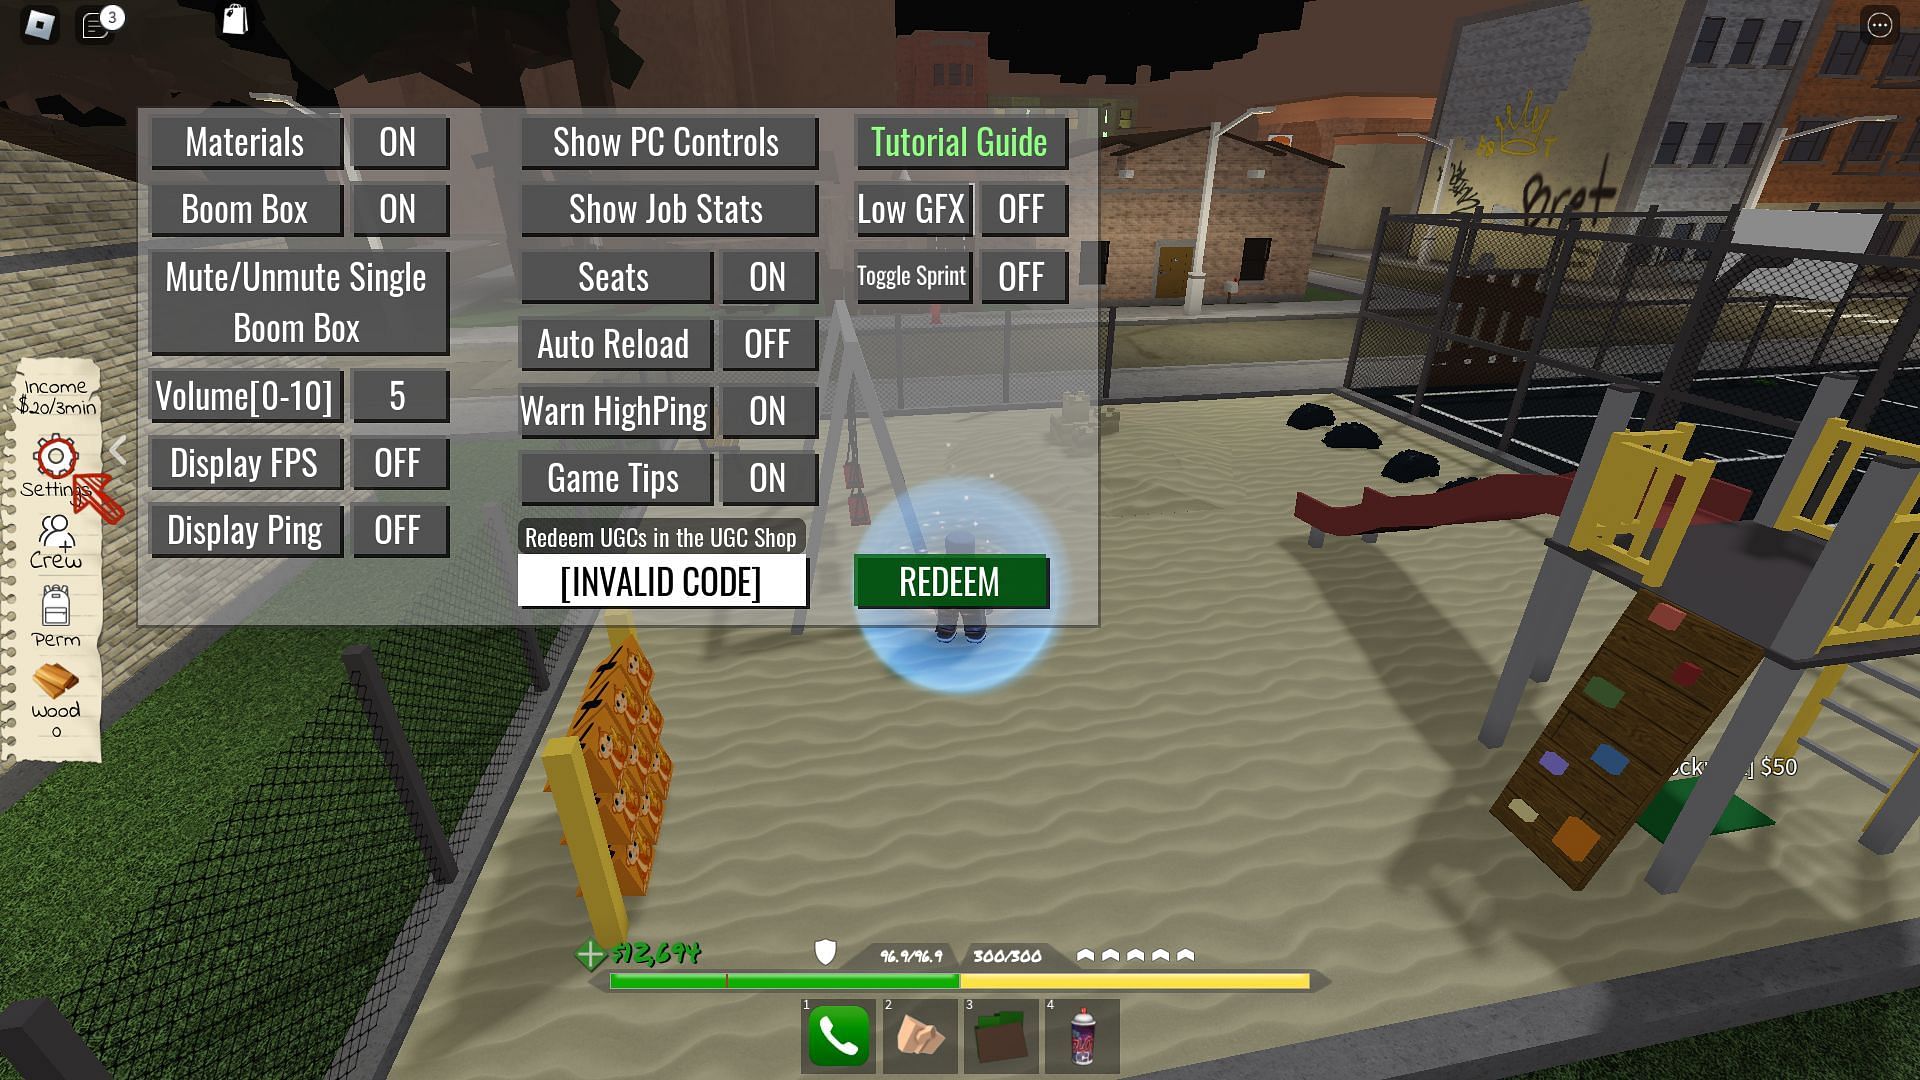 Troubleshooting codes for Clover City (Image via Roblox)